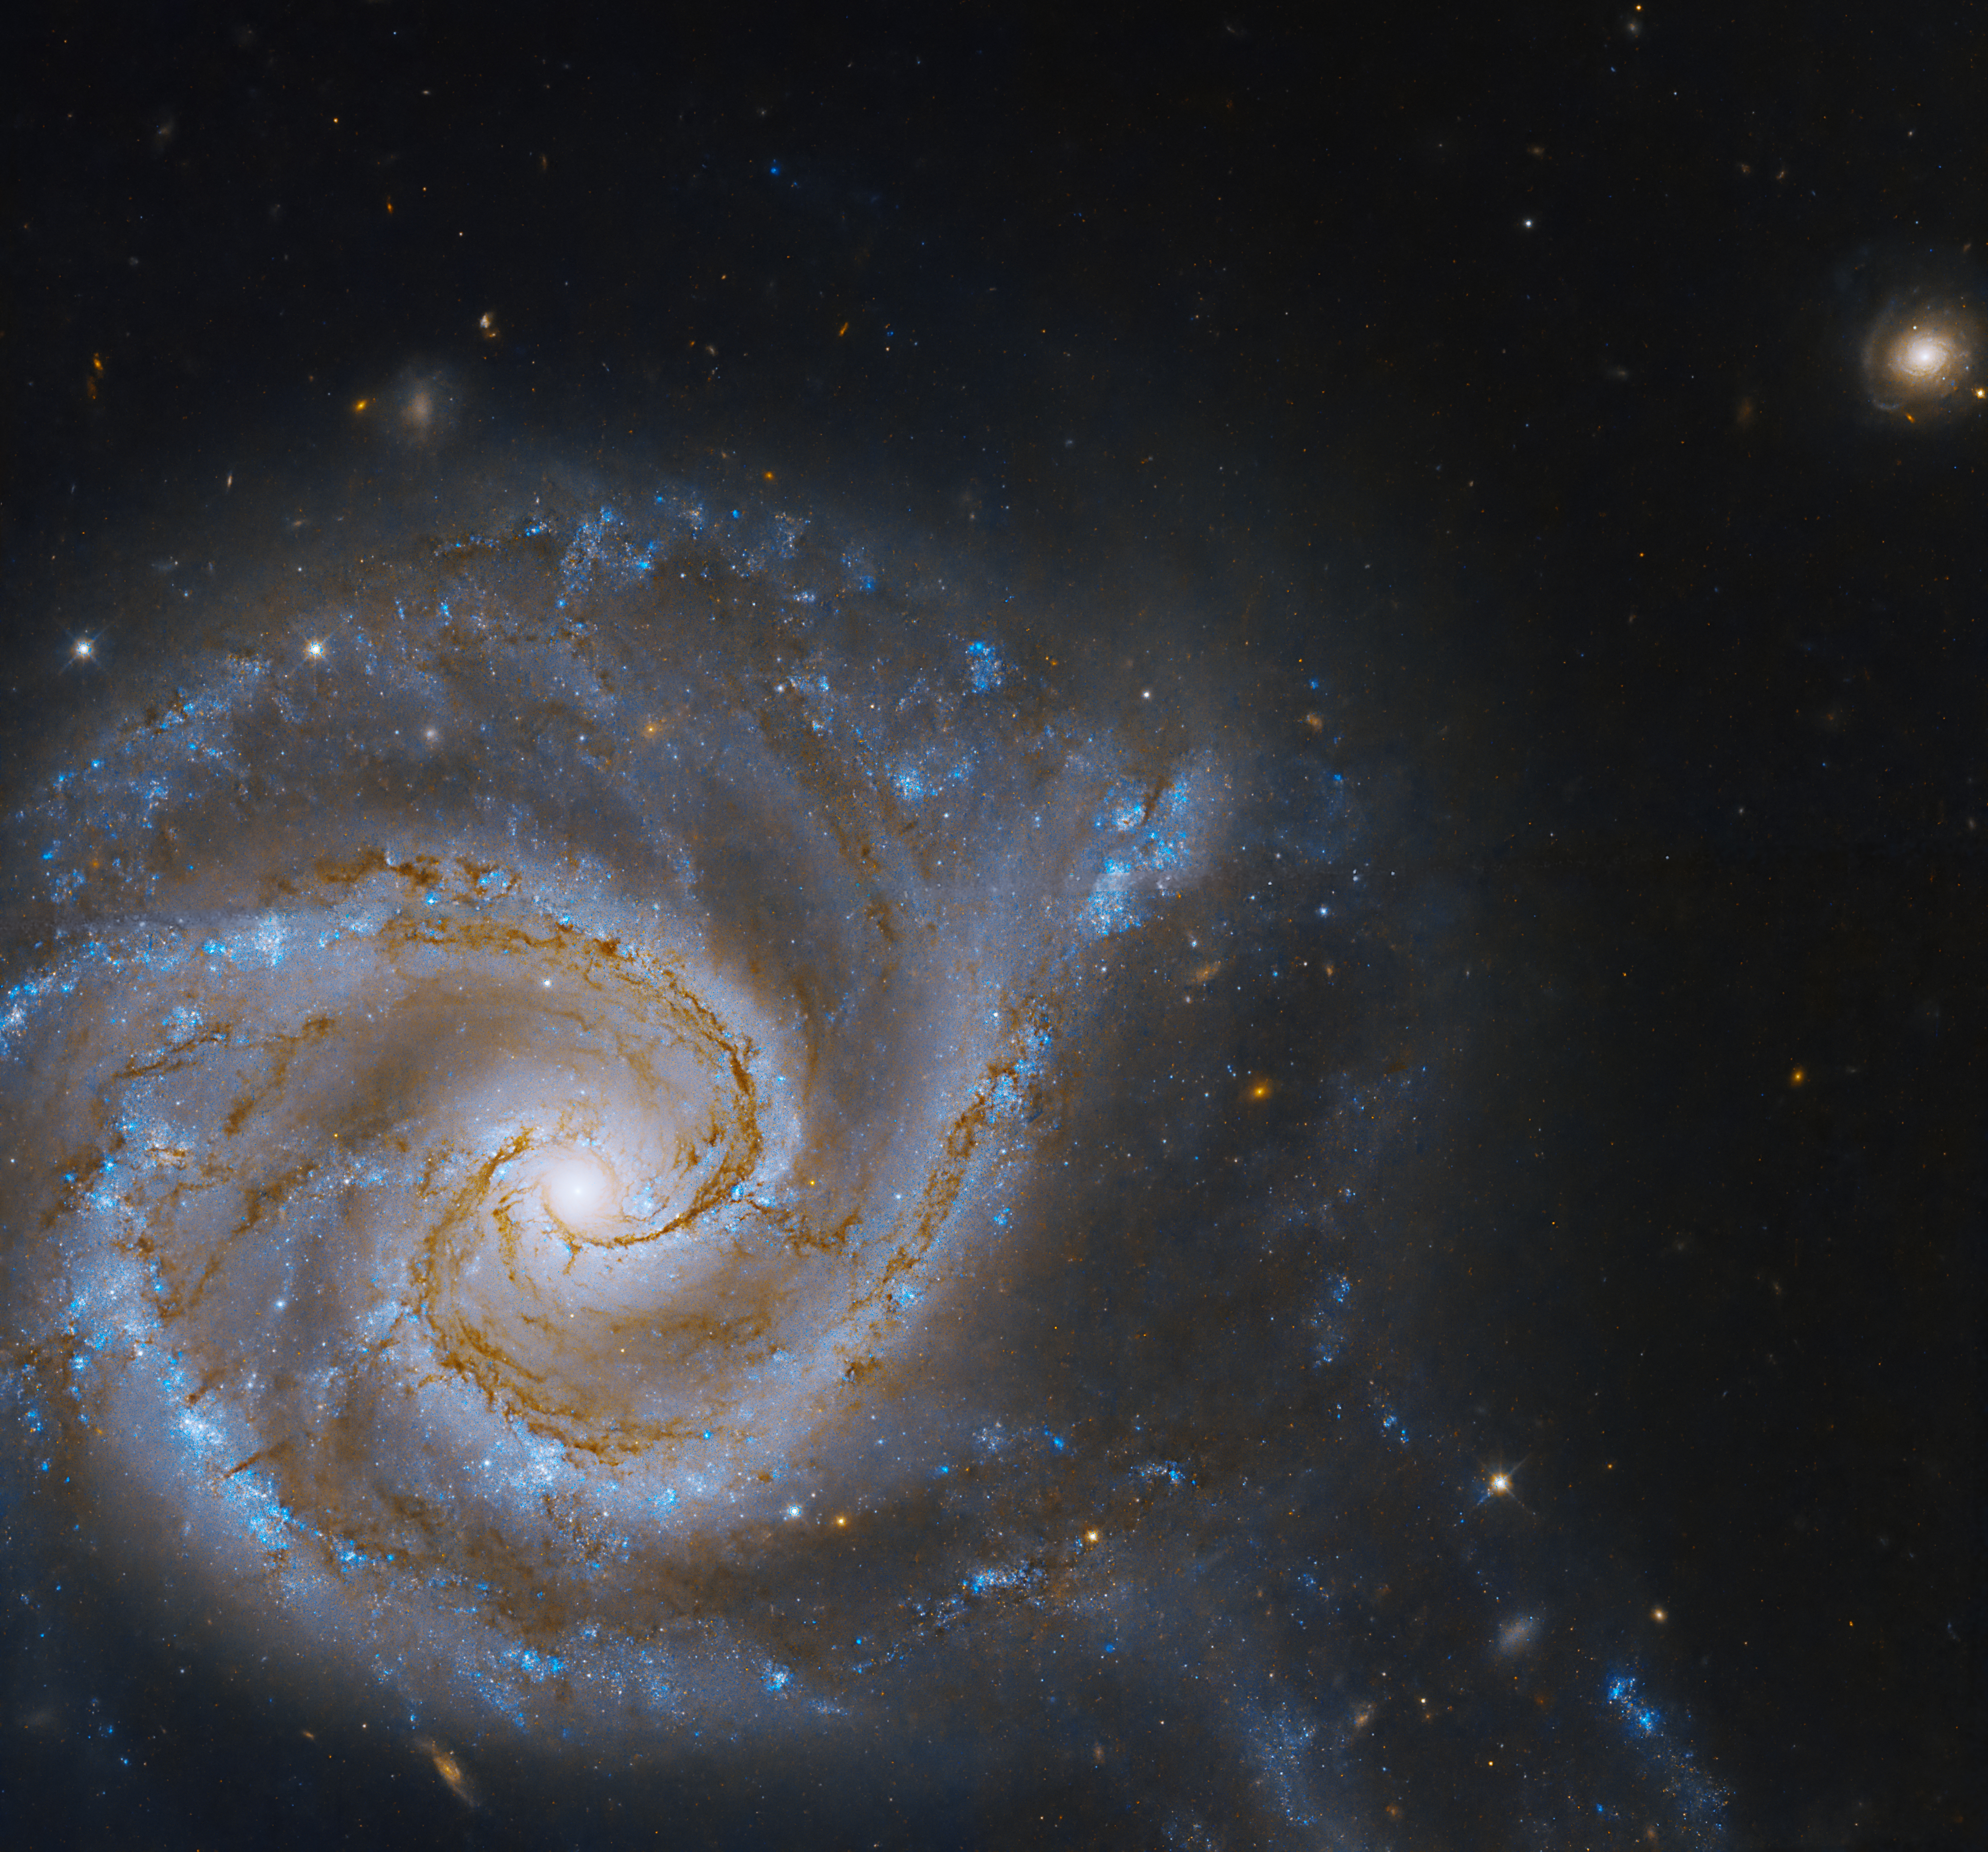 A massive spiral galaxy fills the lower left of the image. Spiral arms full of dark brown dust and bright blue stars extend out from the yellow galactic core, all against black space dotted with more distant galaxies and stars.